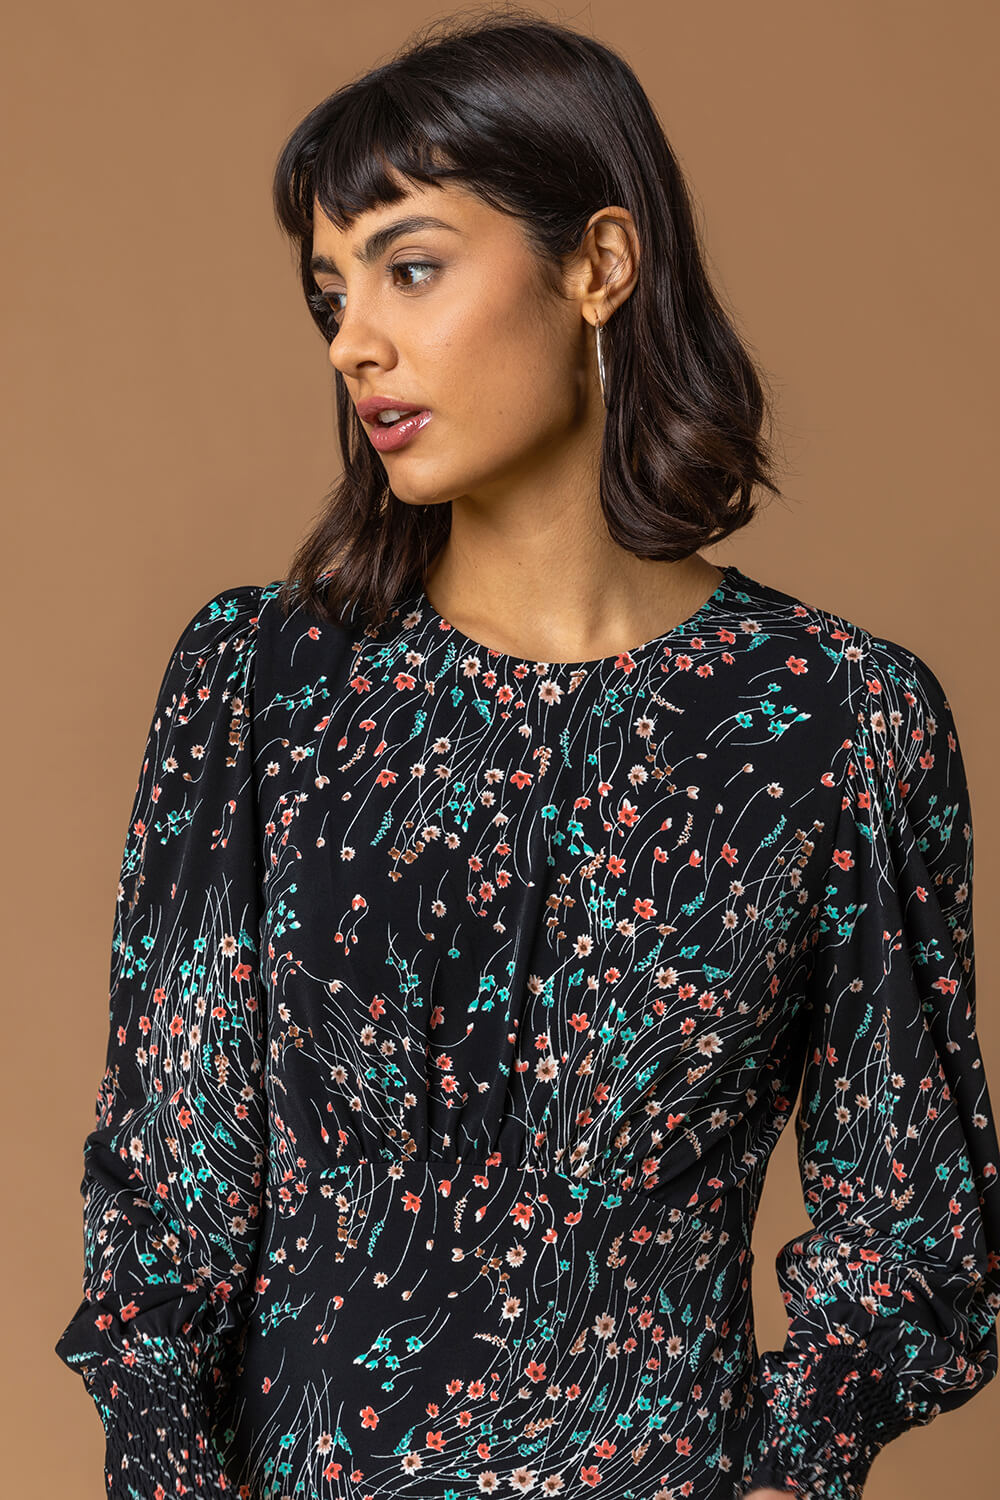 Black Floral Print Gathered Bust Top, Image 4 of 5